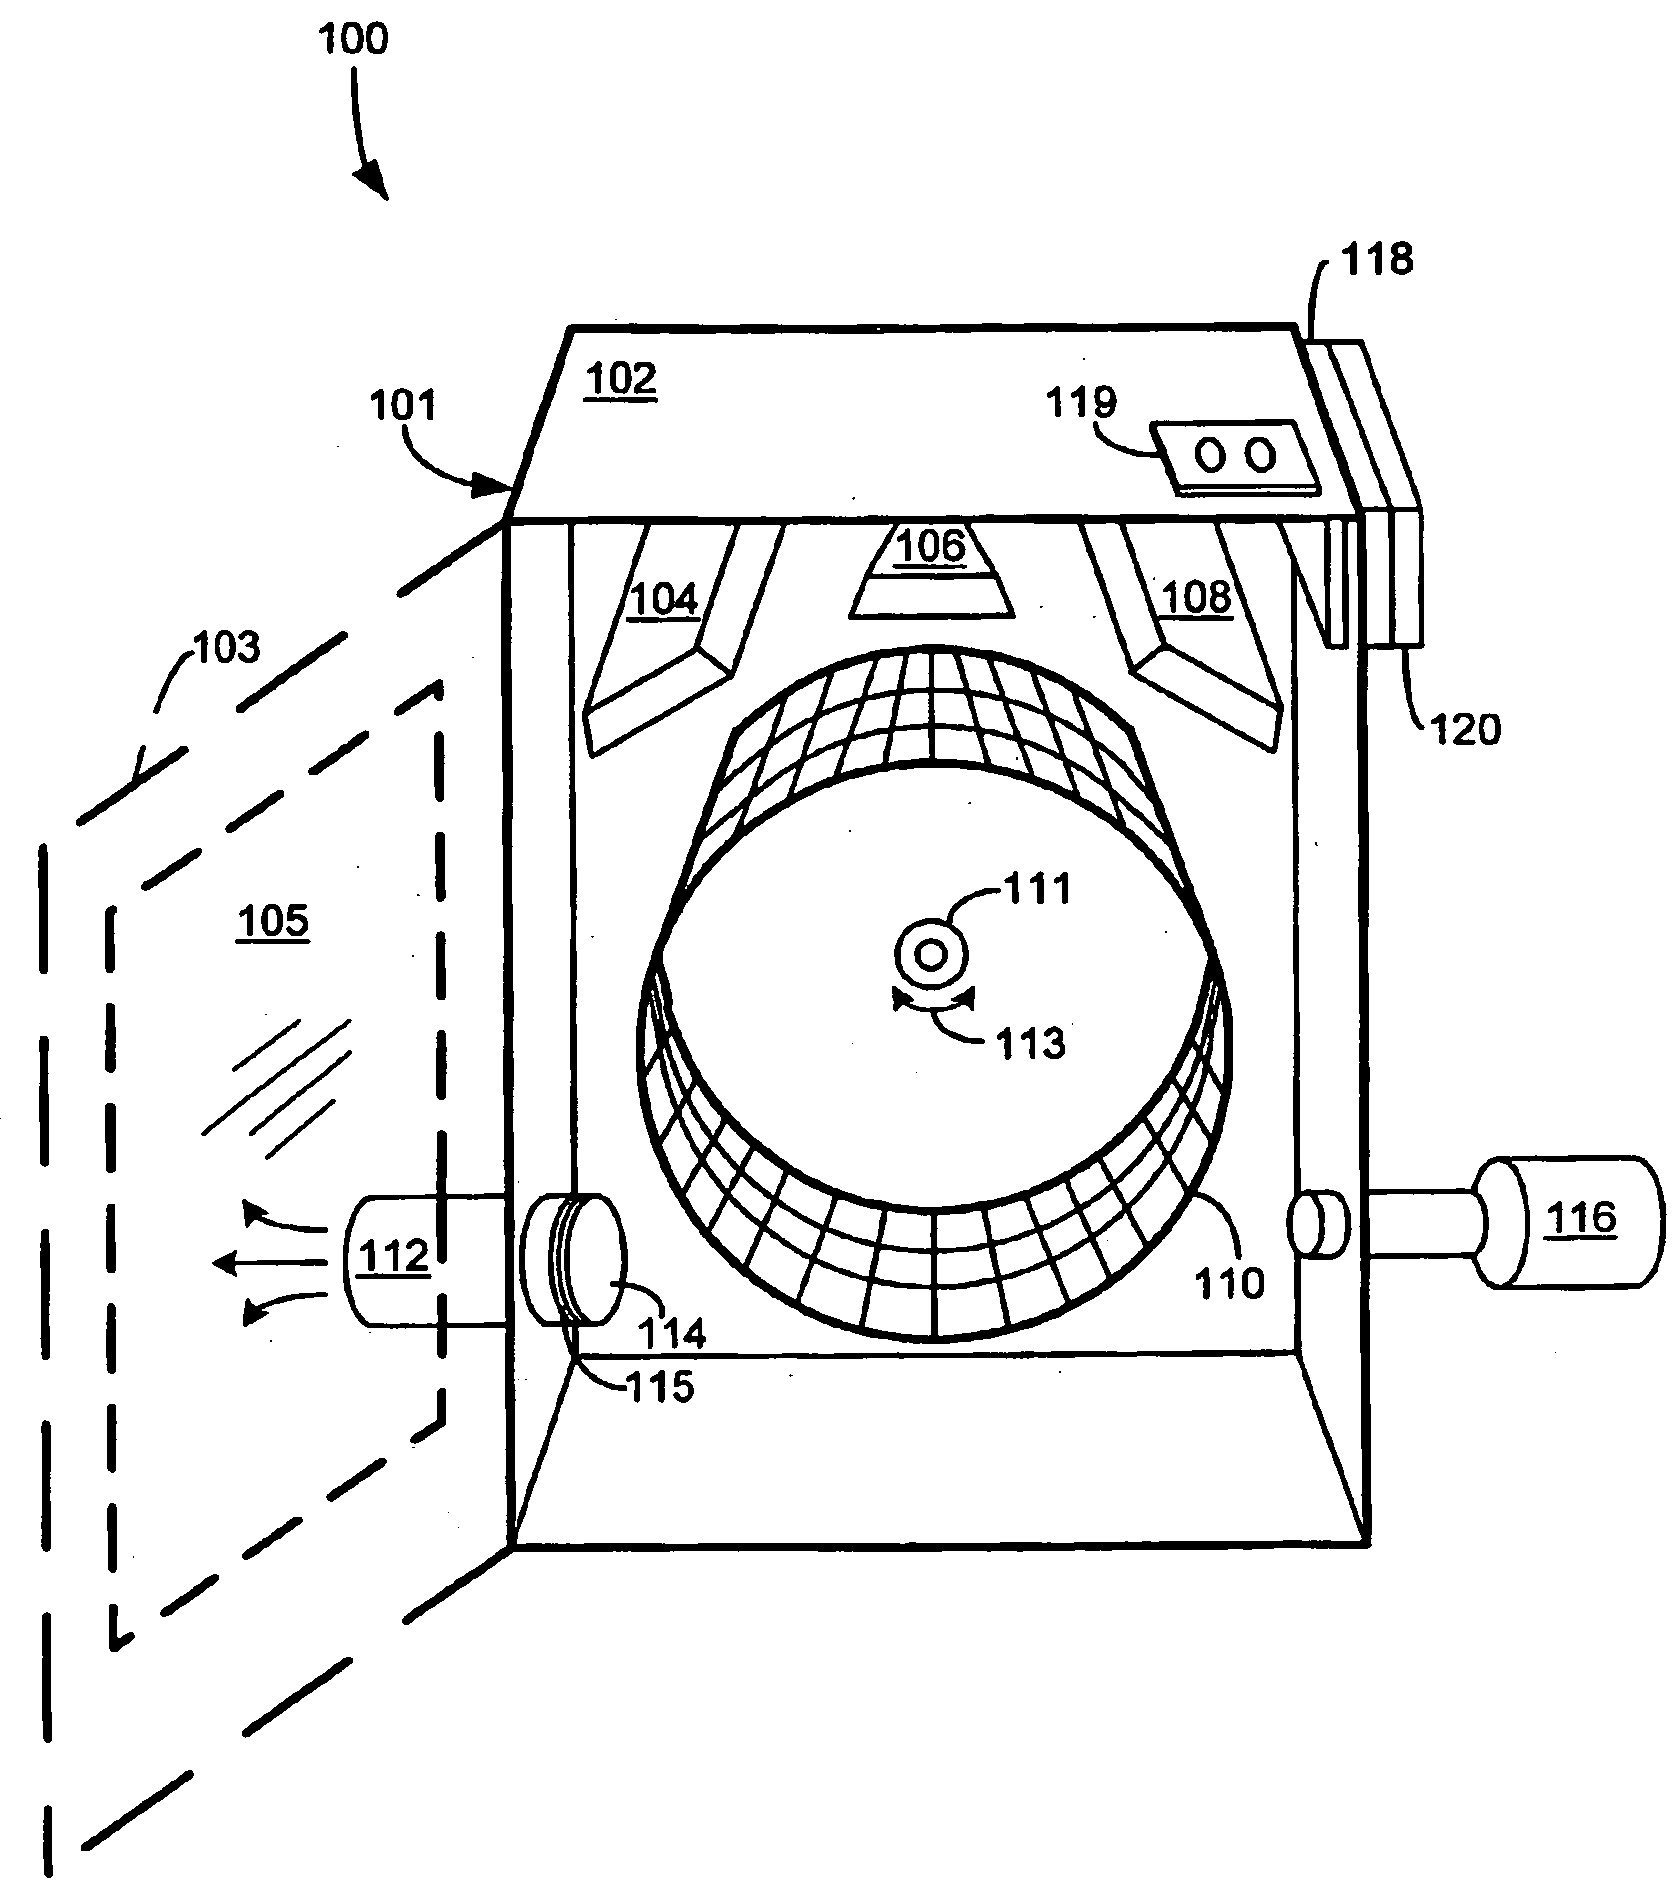 Article processing apparatus and related methods